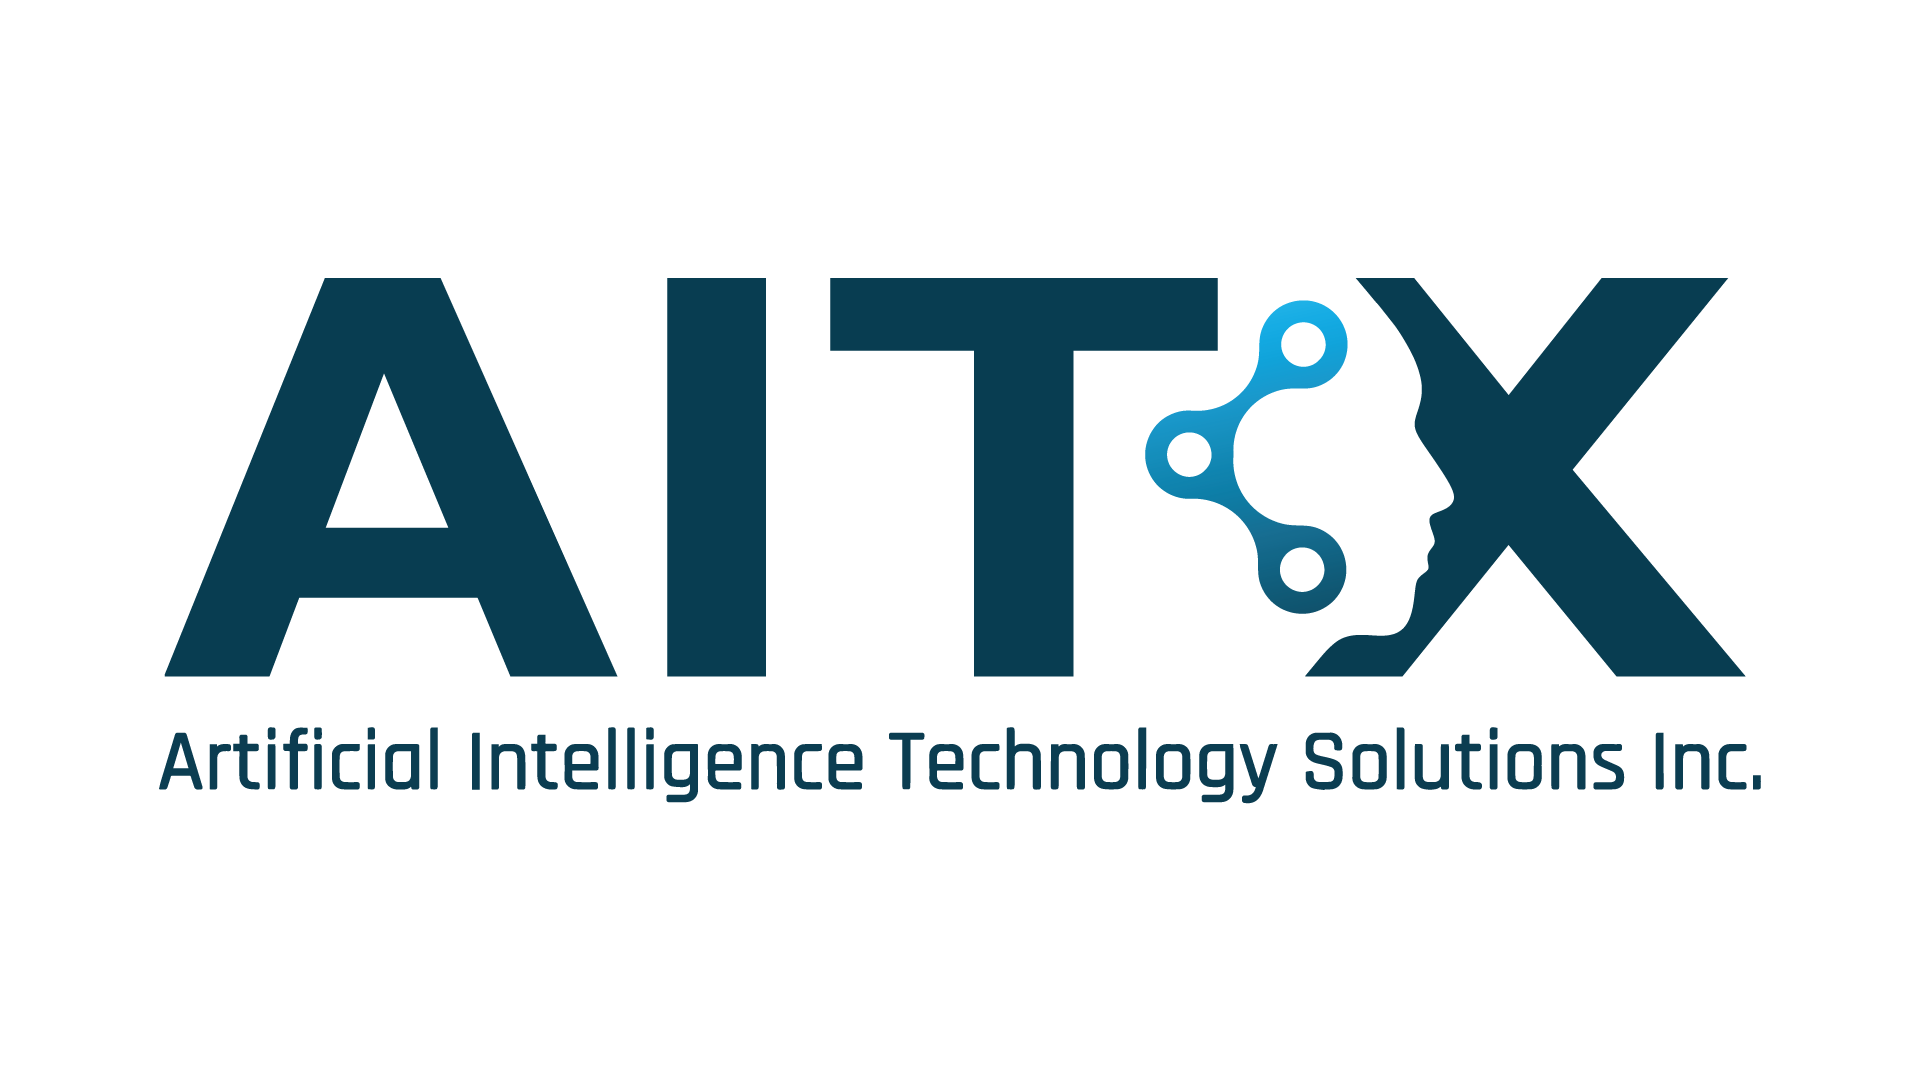 AITX to Host Investor Town Hall and RAD Technology Reveal